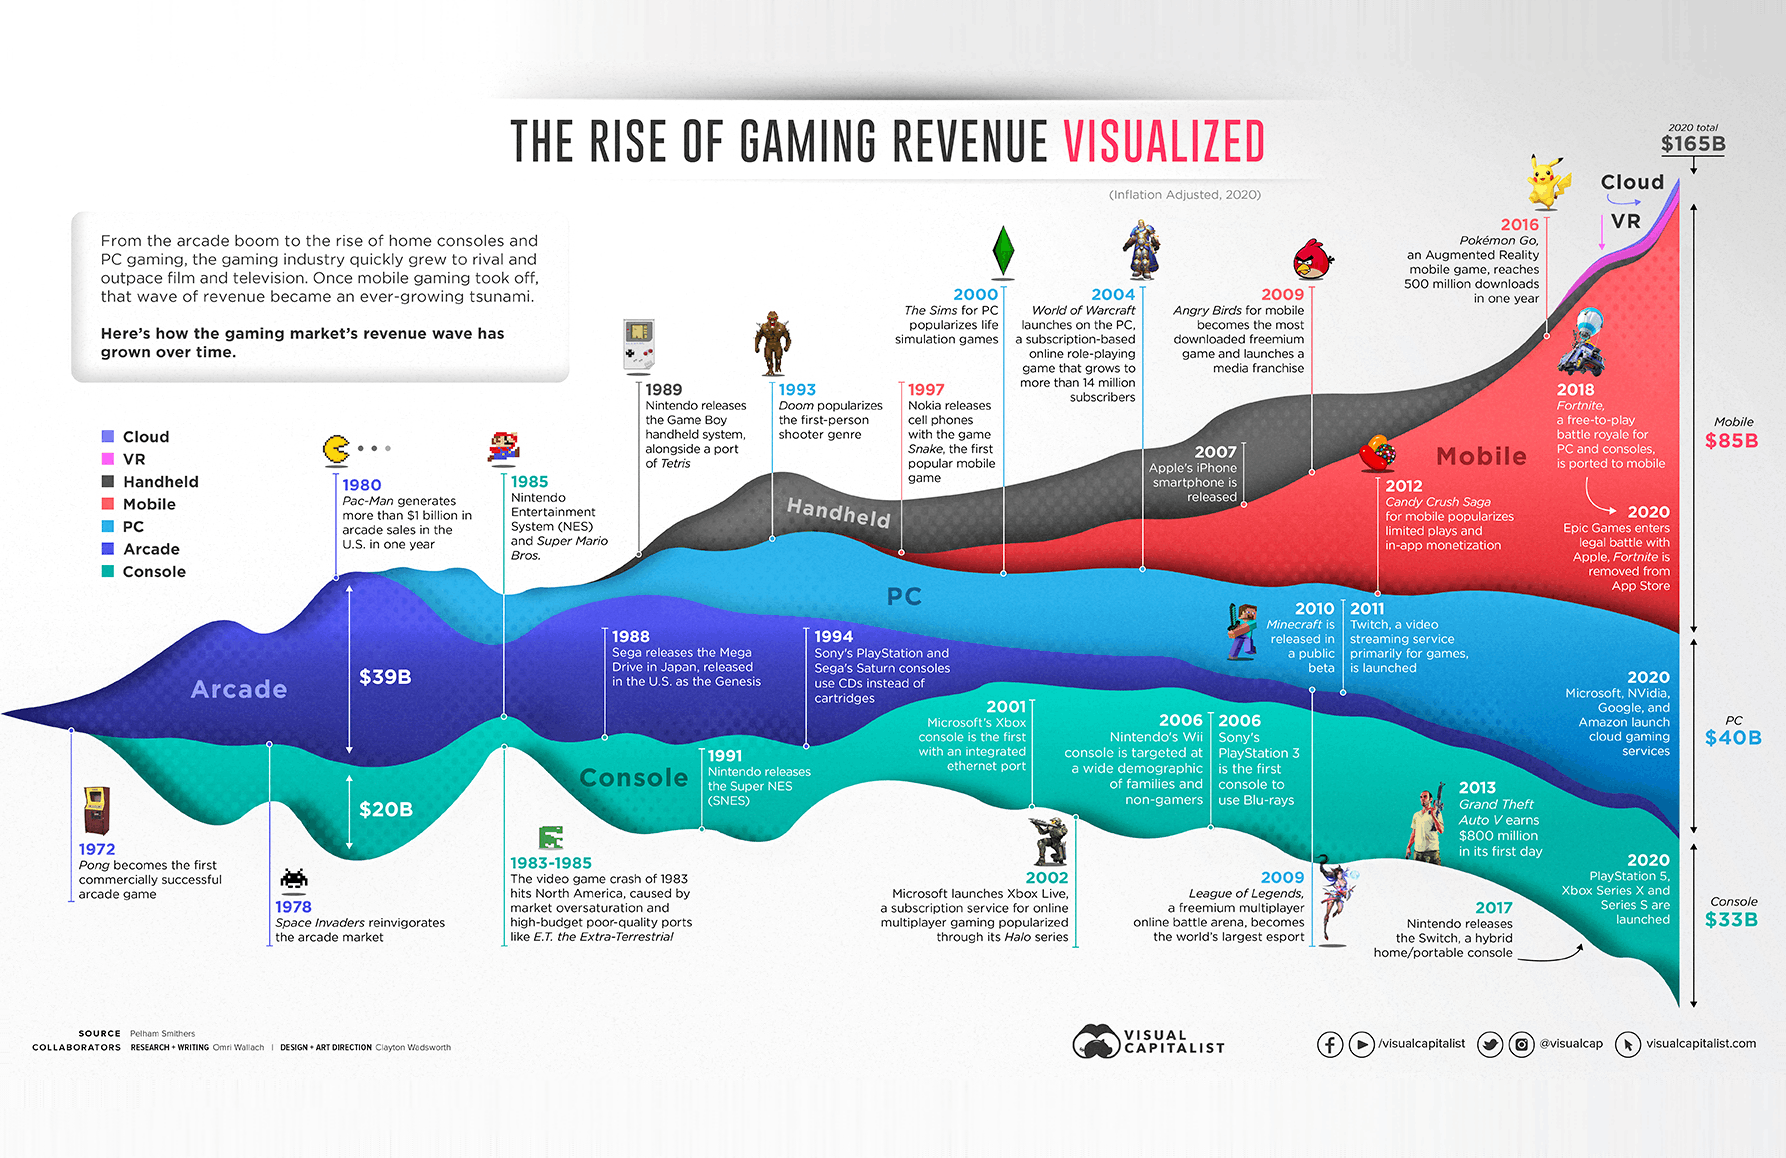 A History of the Gaming Industry and Its Revenue (infographic)